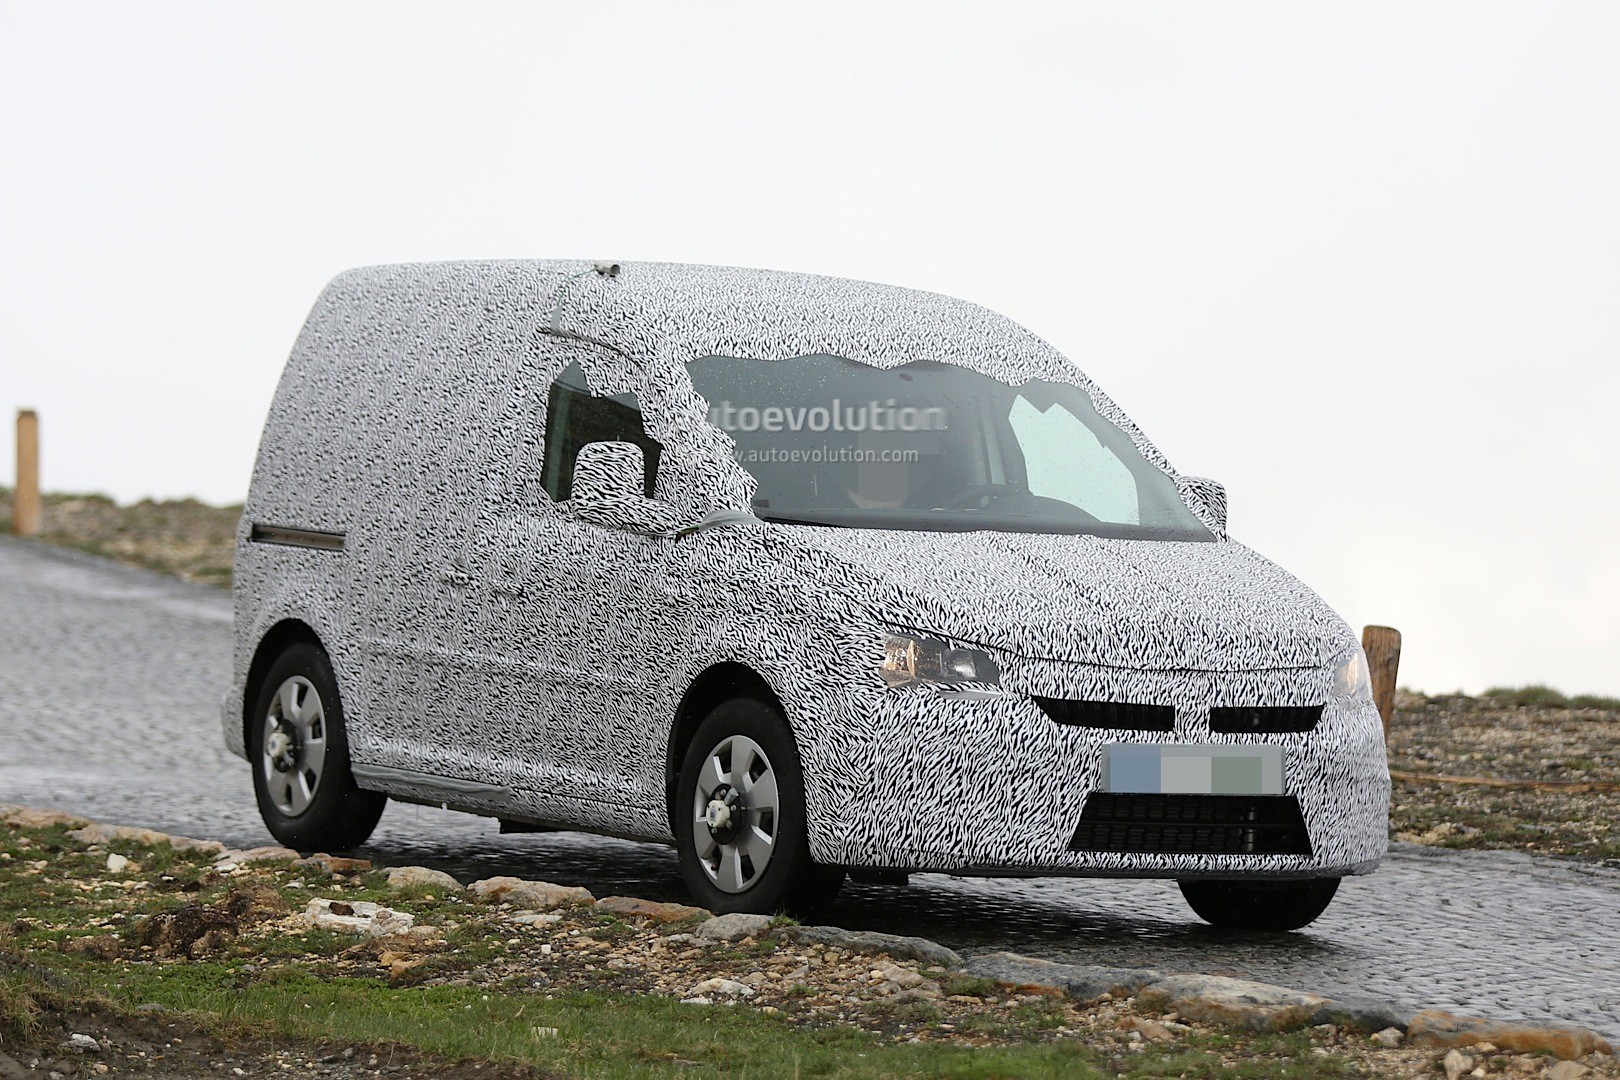 Skoda Reportedly Delays Next-Gen Roomster MPV For 2016